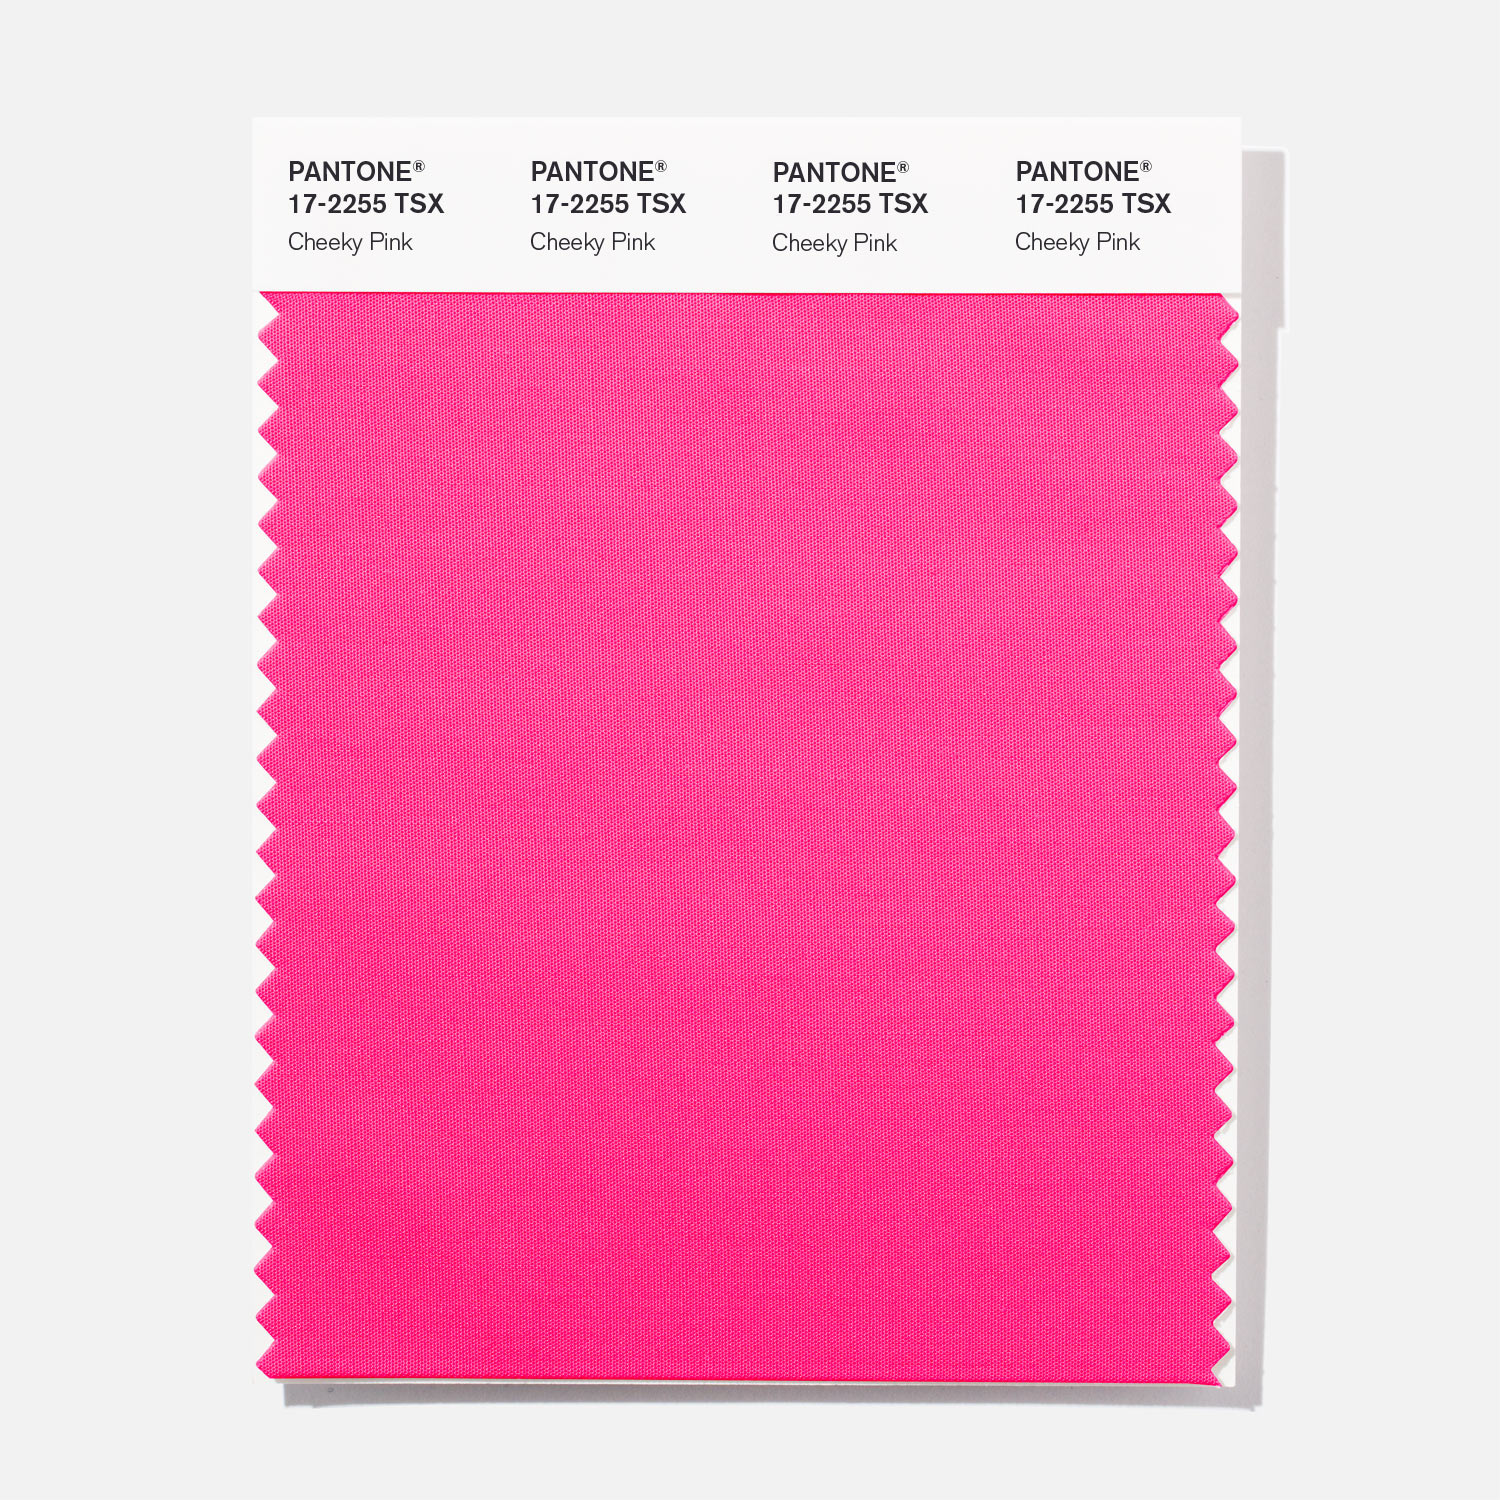 Pantone Polyester Swatch 17-2255 Cheeky Pink